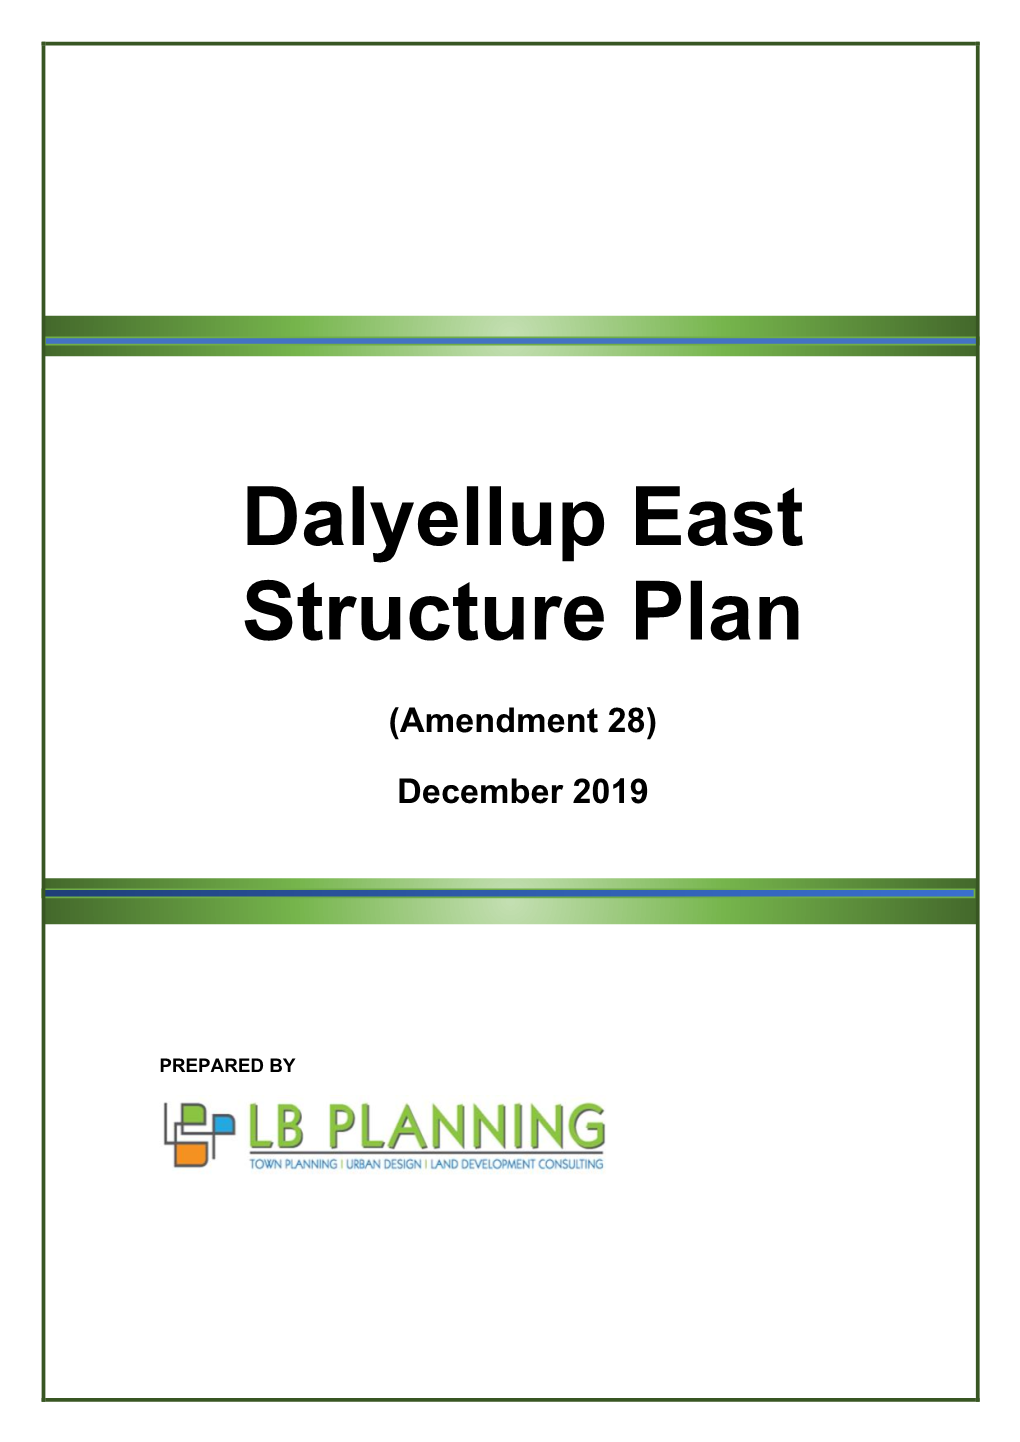 Dalyellup East Structure Plan